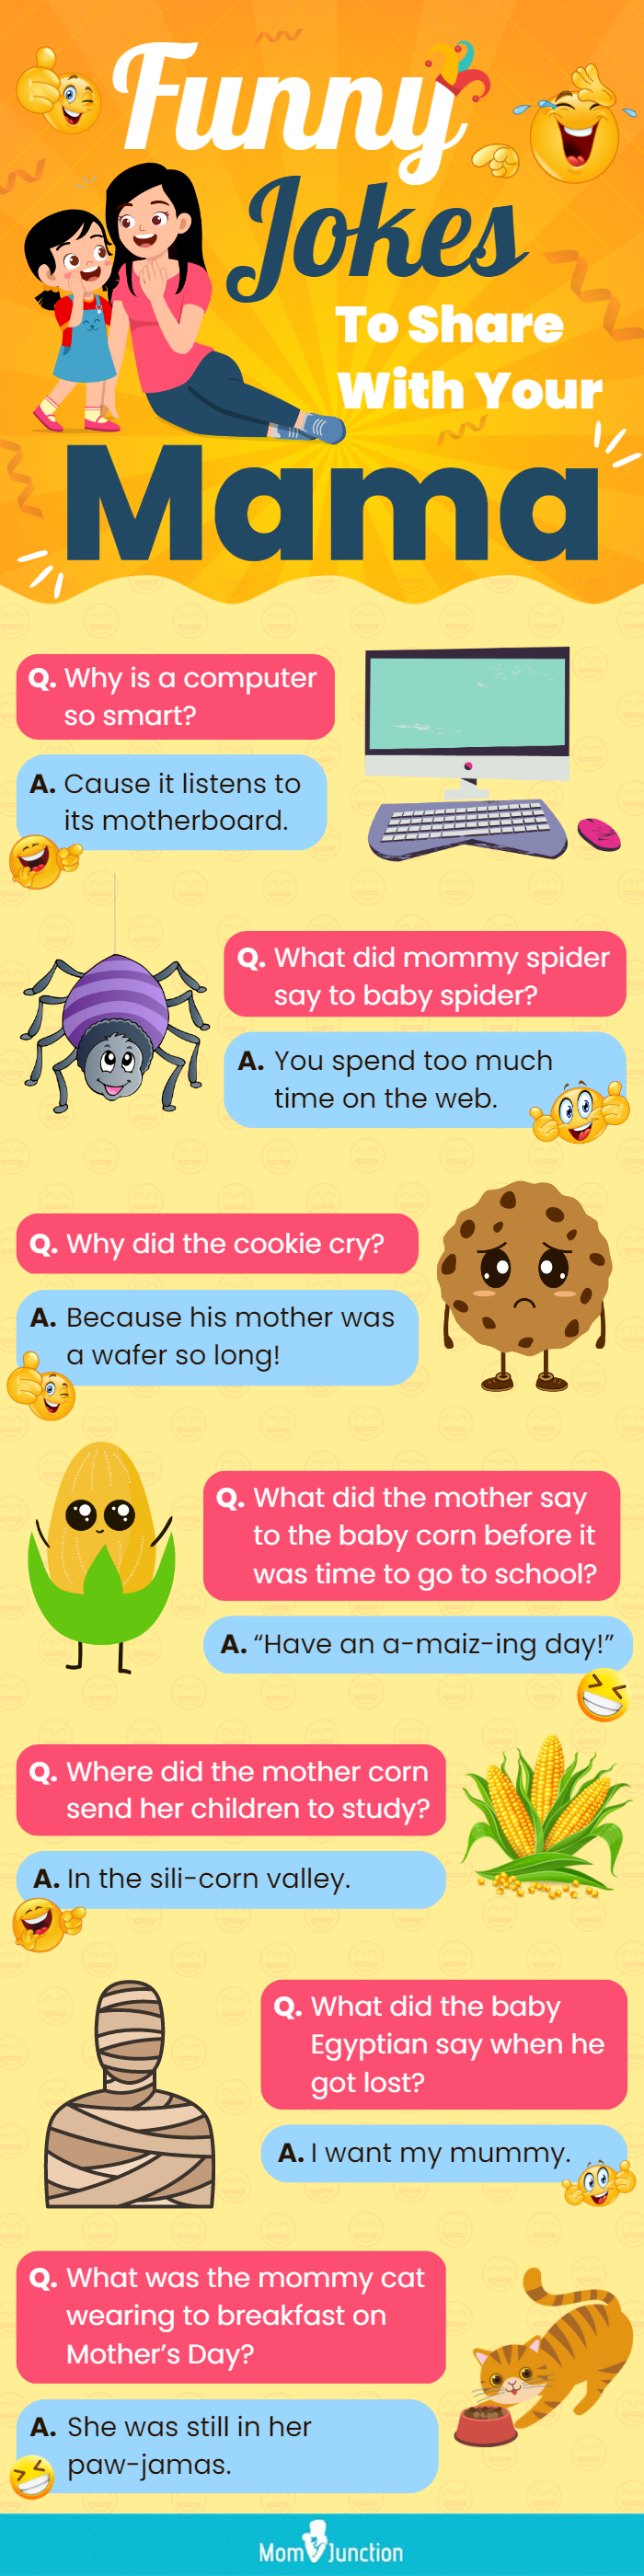 funny jokes to share with your mama (infographic)